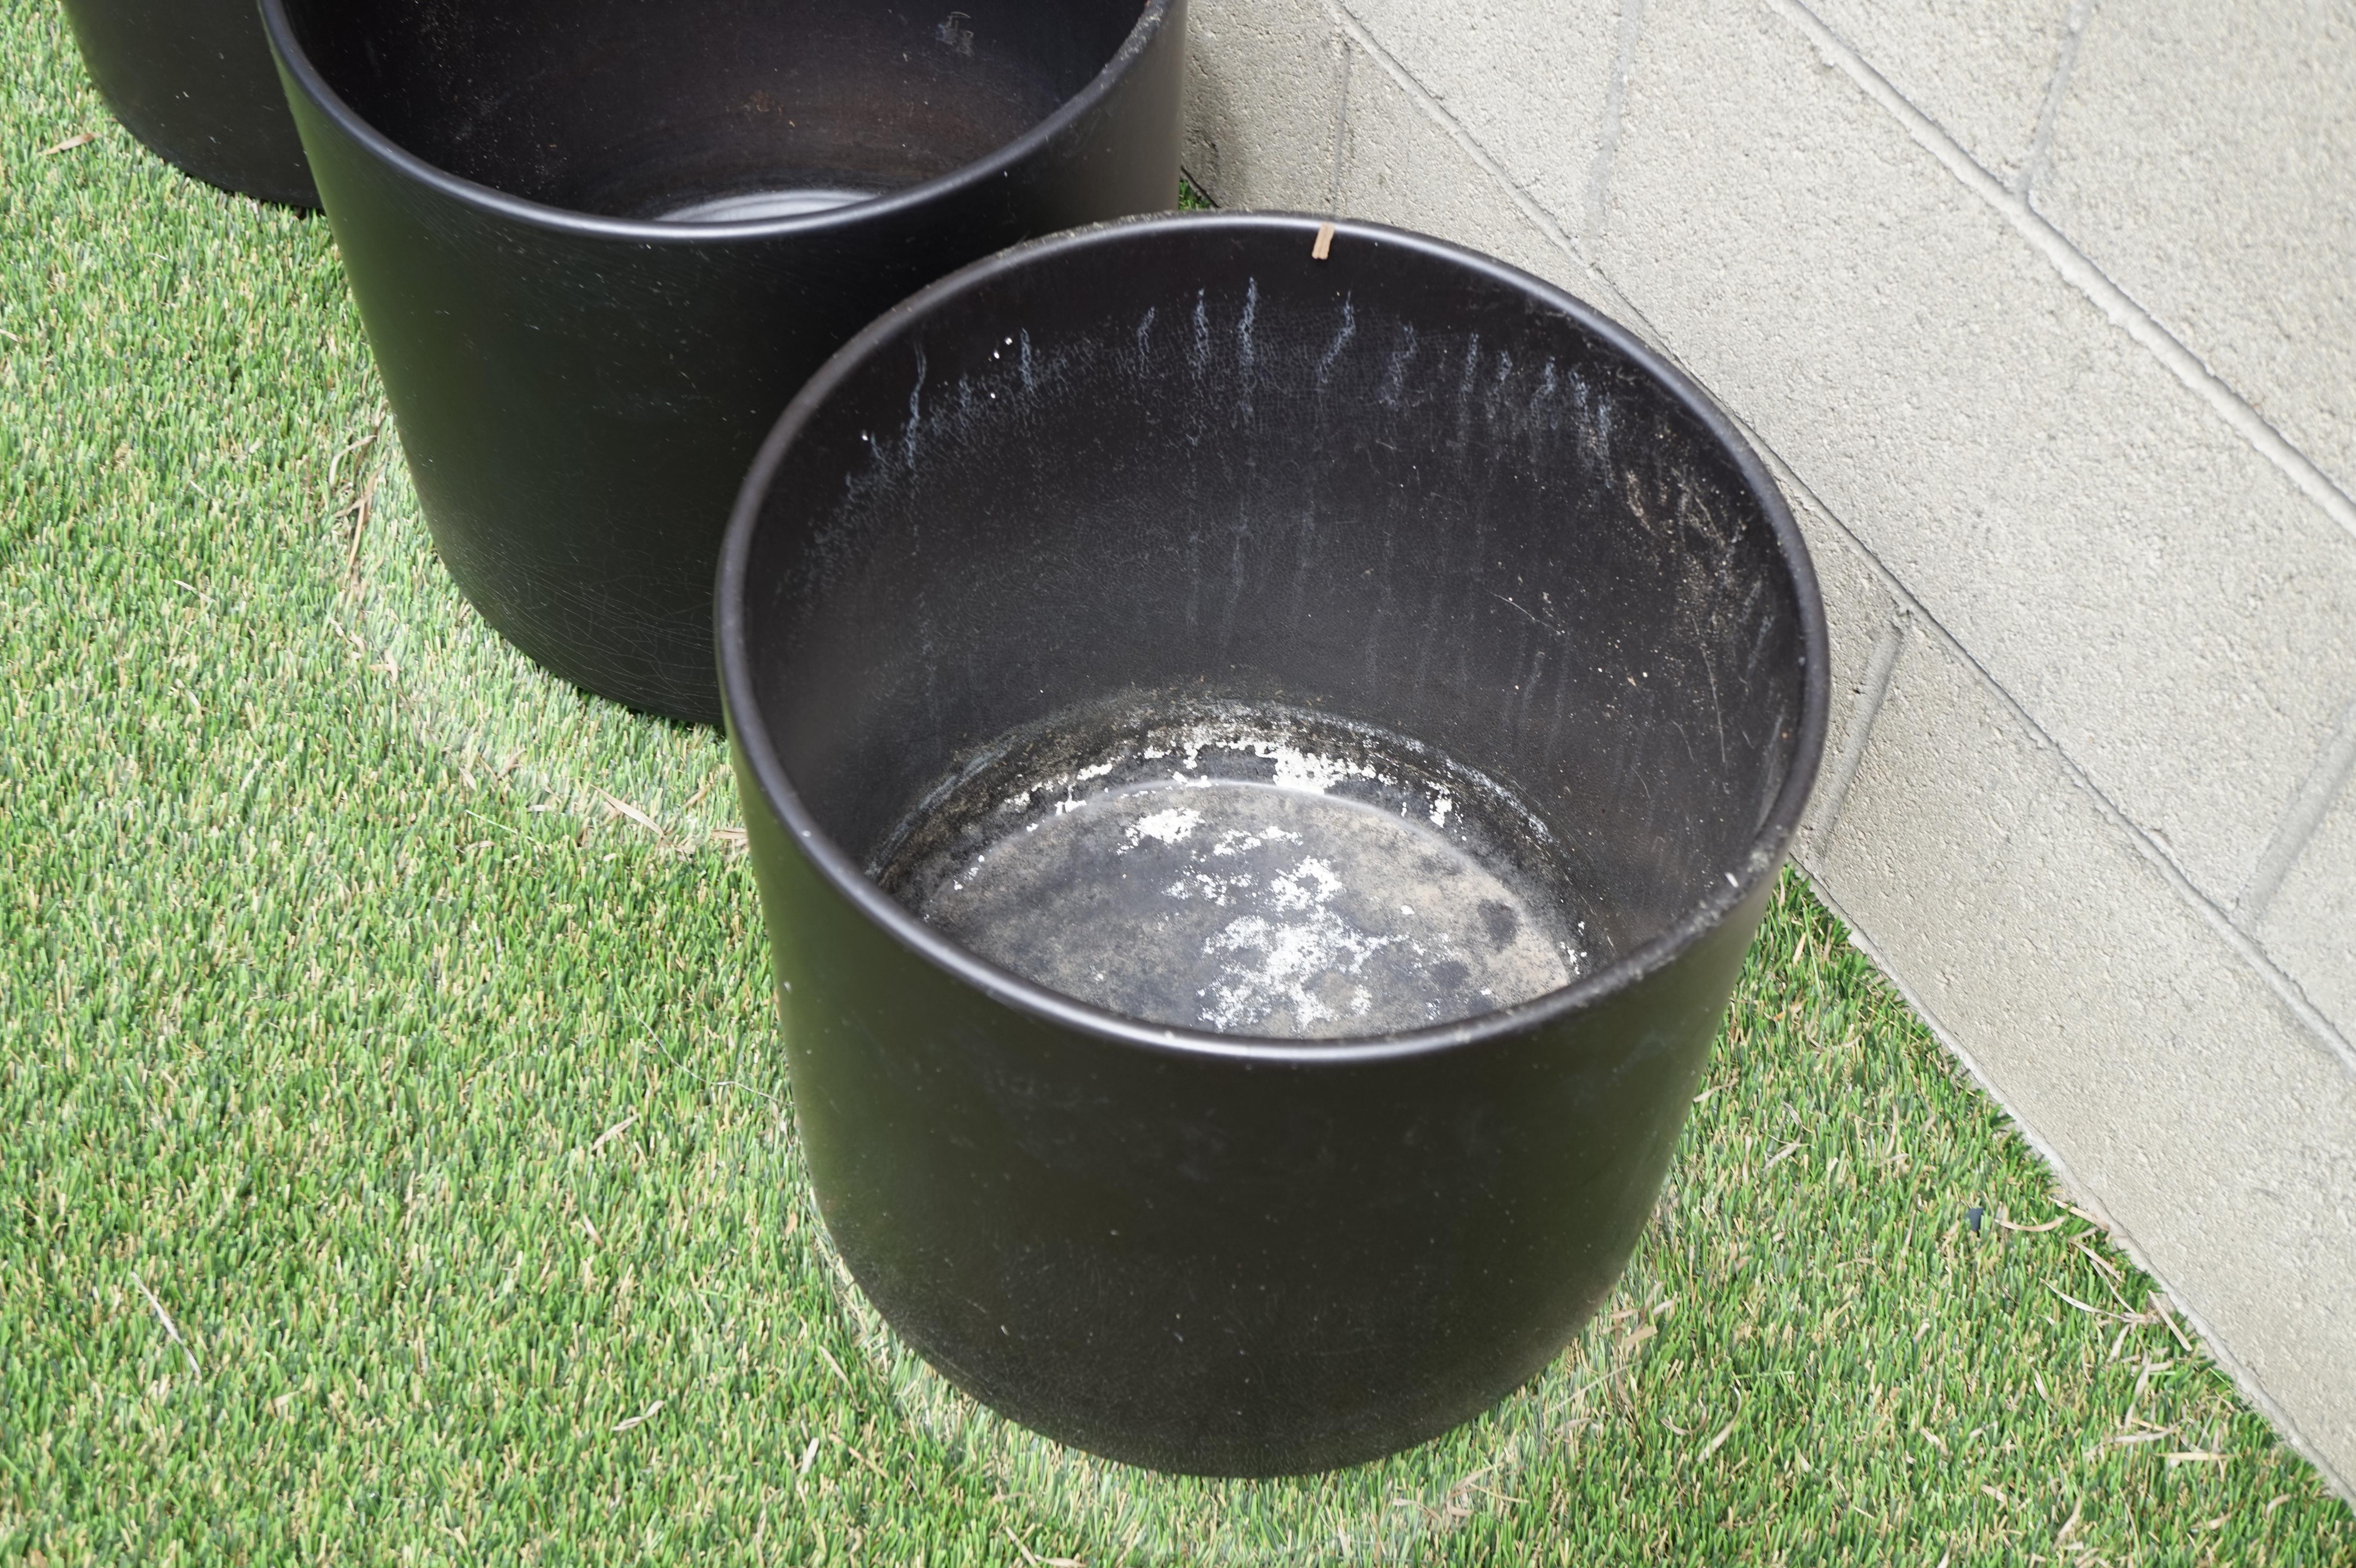 American Midcentury Architectural Pottery Black Ceramic Planters by Gainey 'Set of 3' For Sale